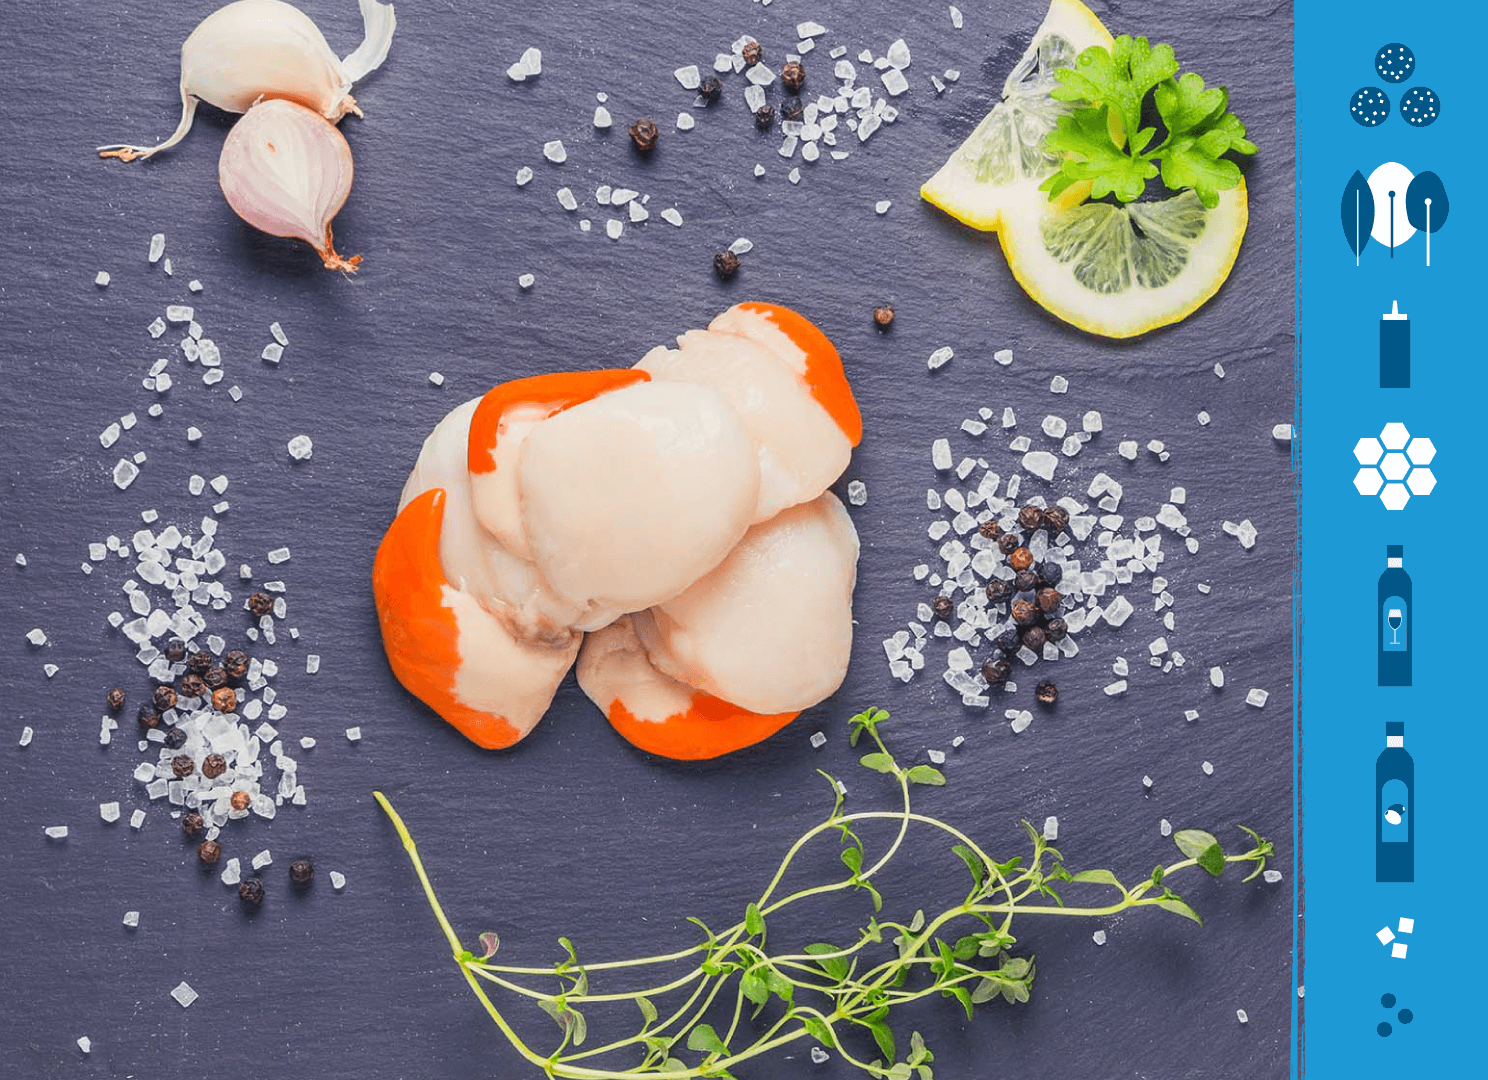 Scallops on a slate background next to illustrations of the ingredients needed to make scallops and black pudding